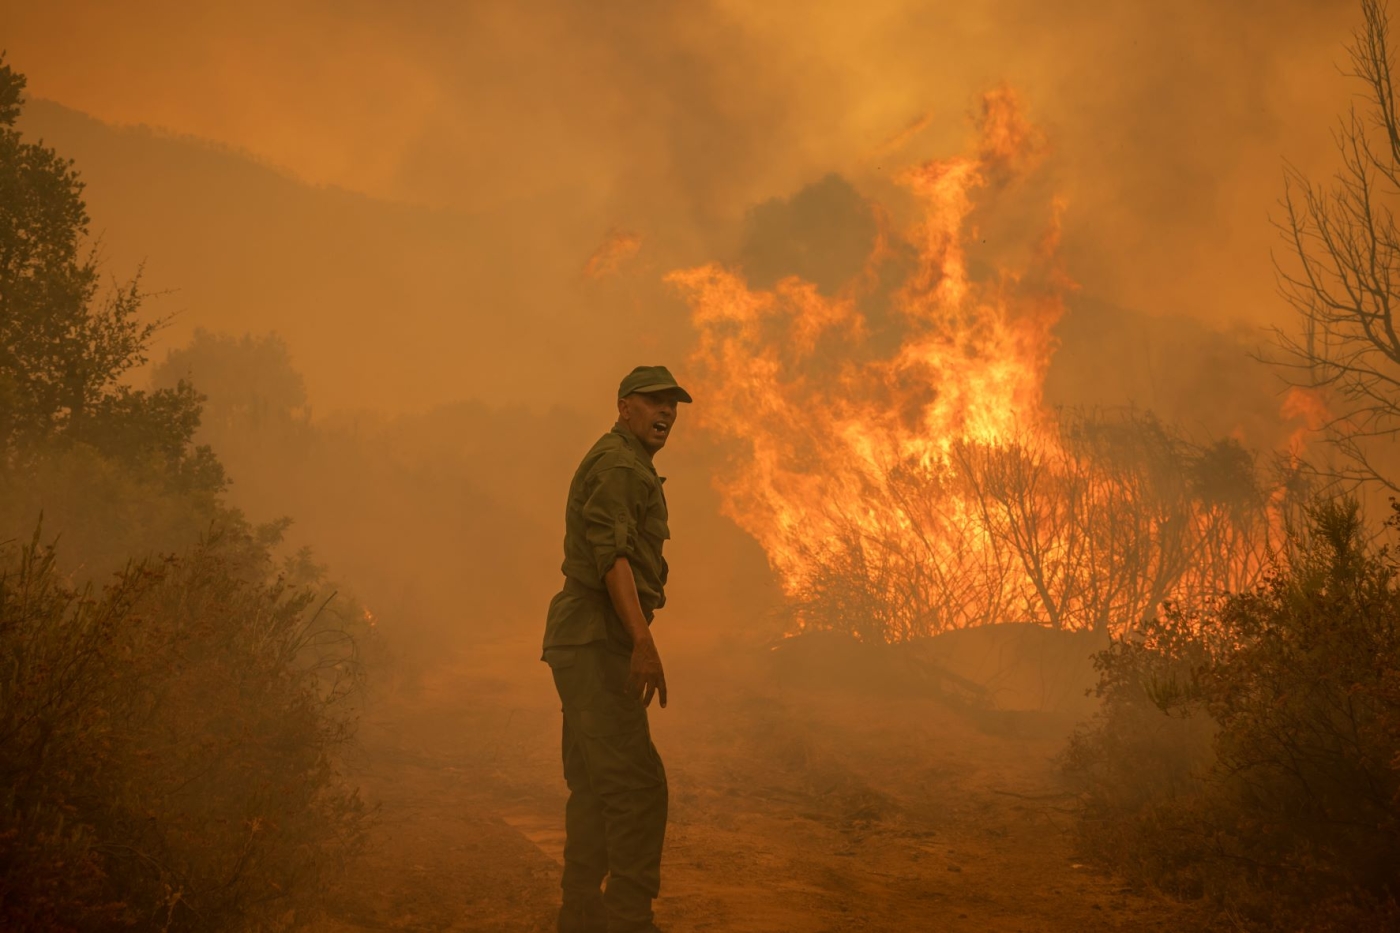 A Moroccan soldier reacts next to a forest fire near Ksar el-Kebir in the Larache region, on 15 July 15, 2022. (AFP)